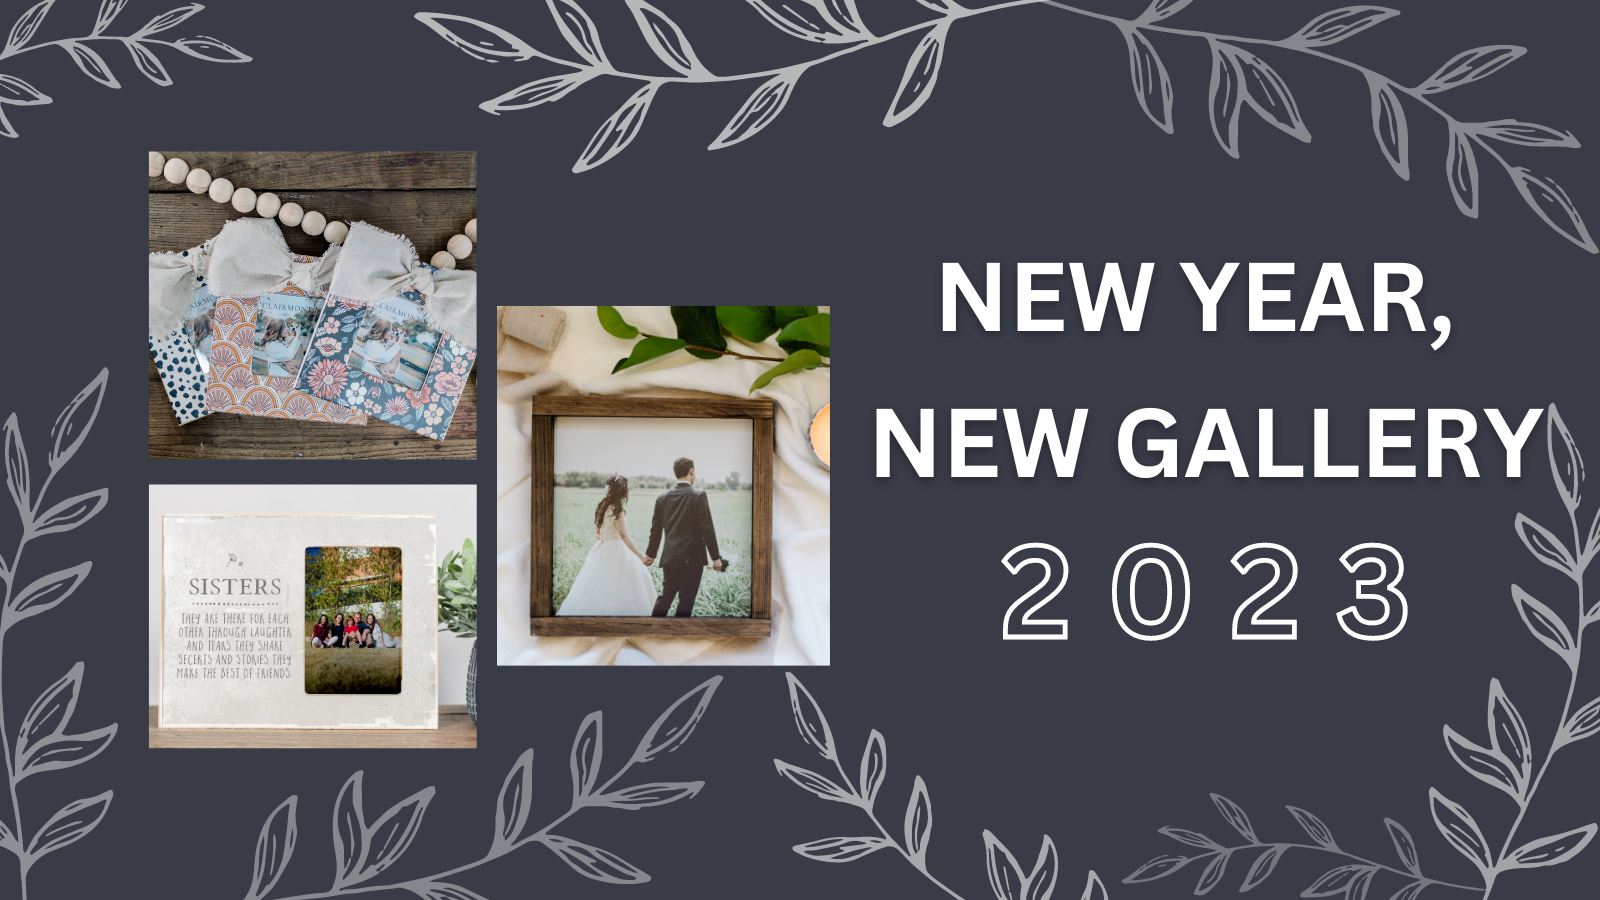 New Year, New Gallery